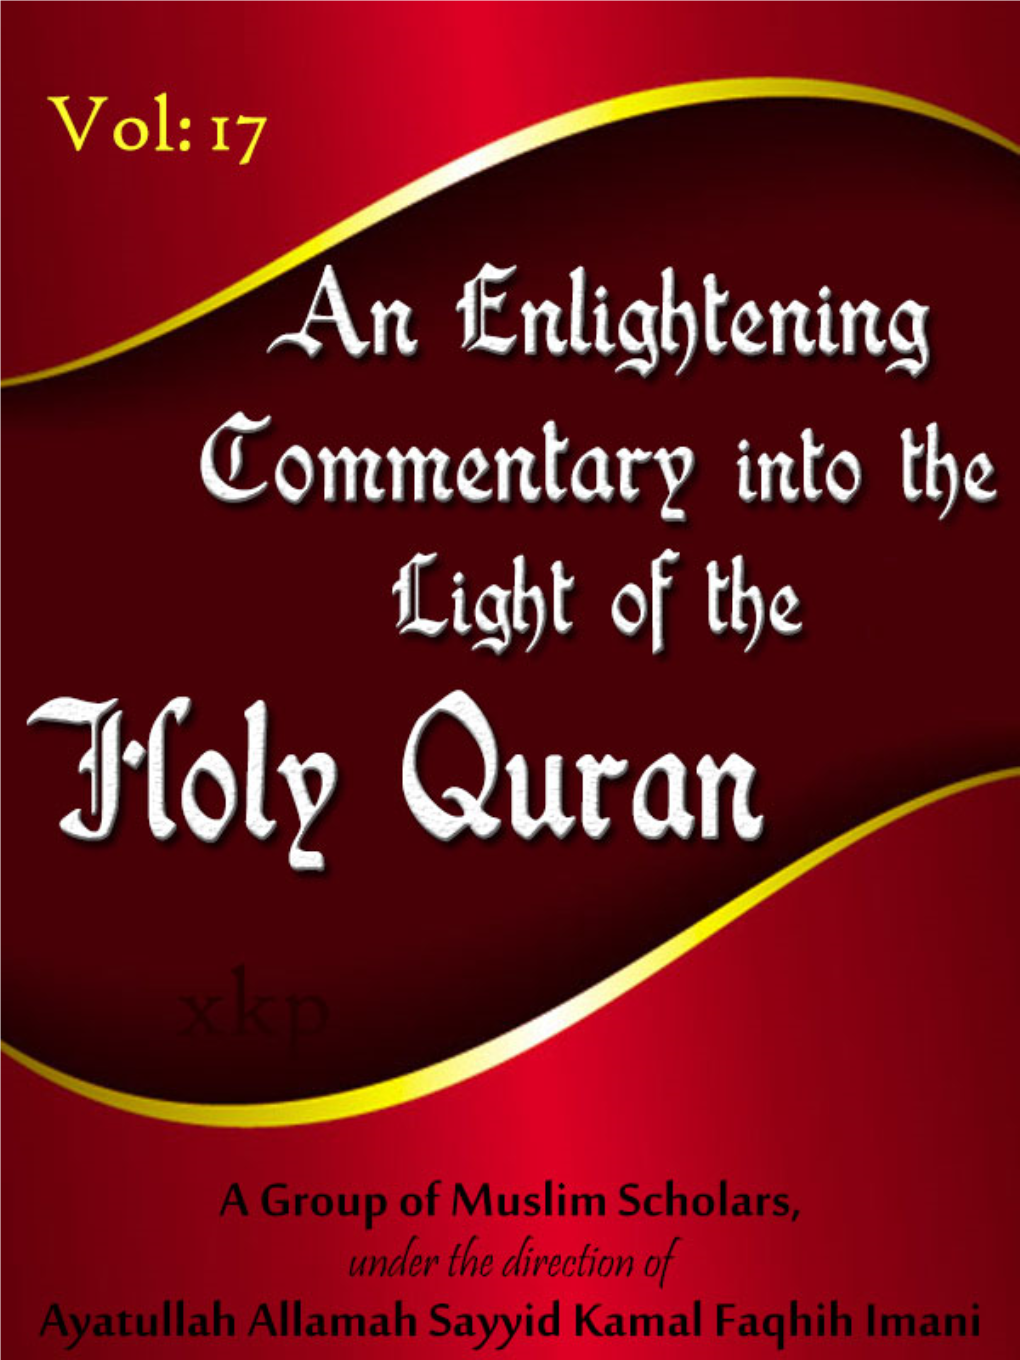 An Enlightening Commentary Into the Light of the Holy Quran Vol: 17 from Surah Al-Jathiyah (45) to Surah Al-Hadid (57) Introduction